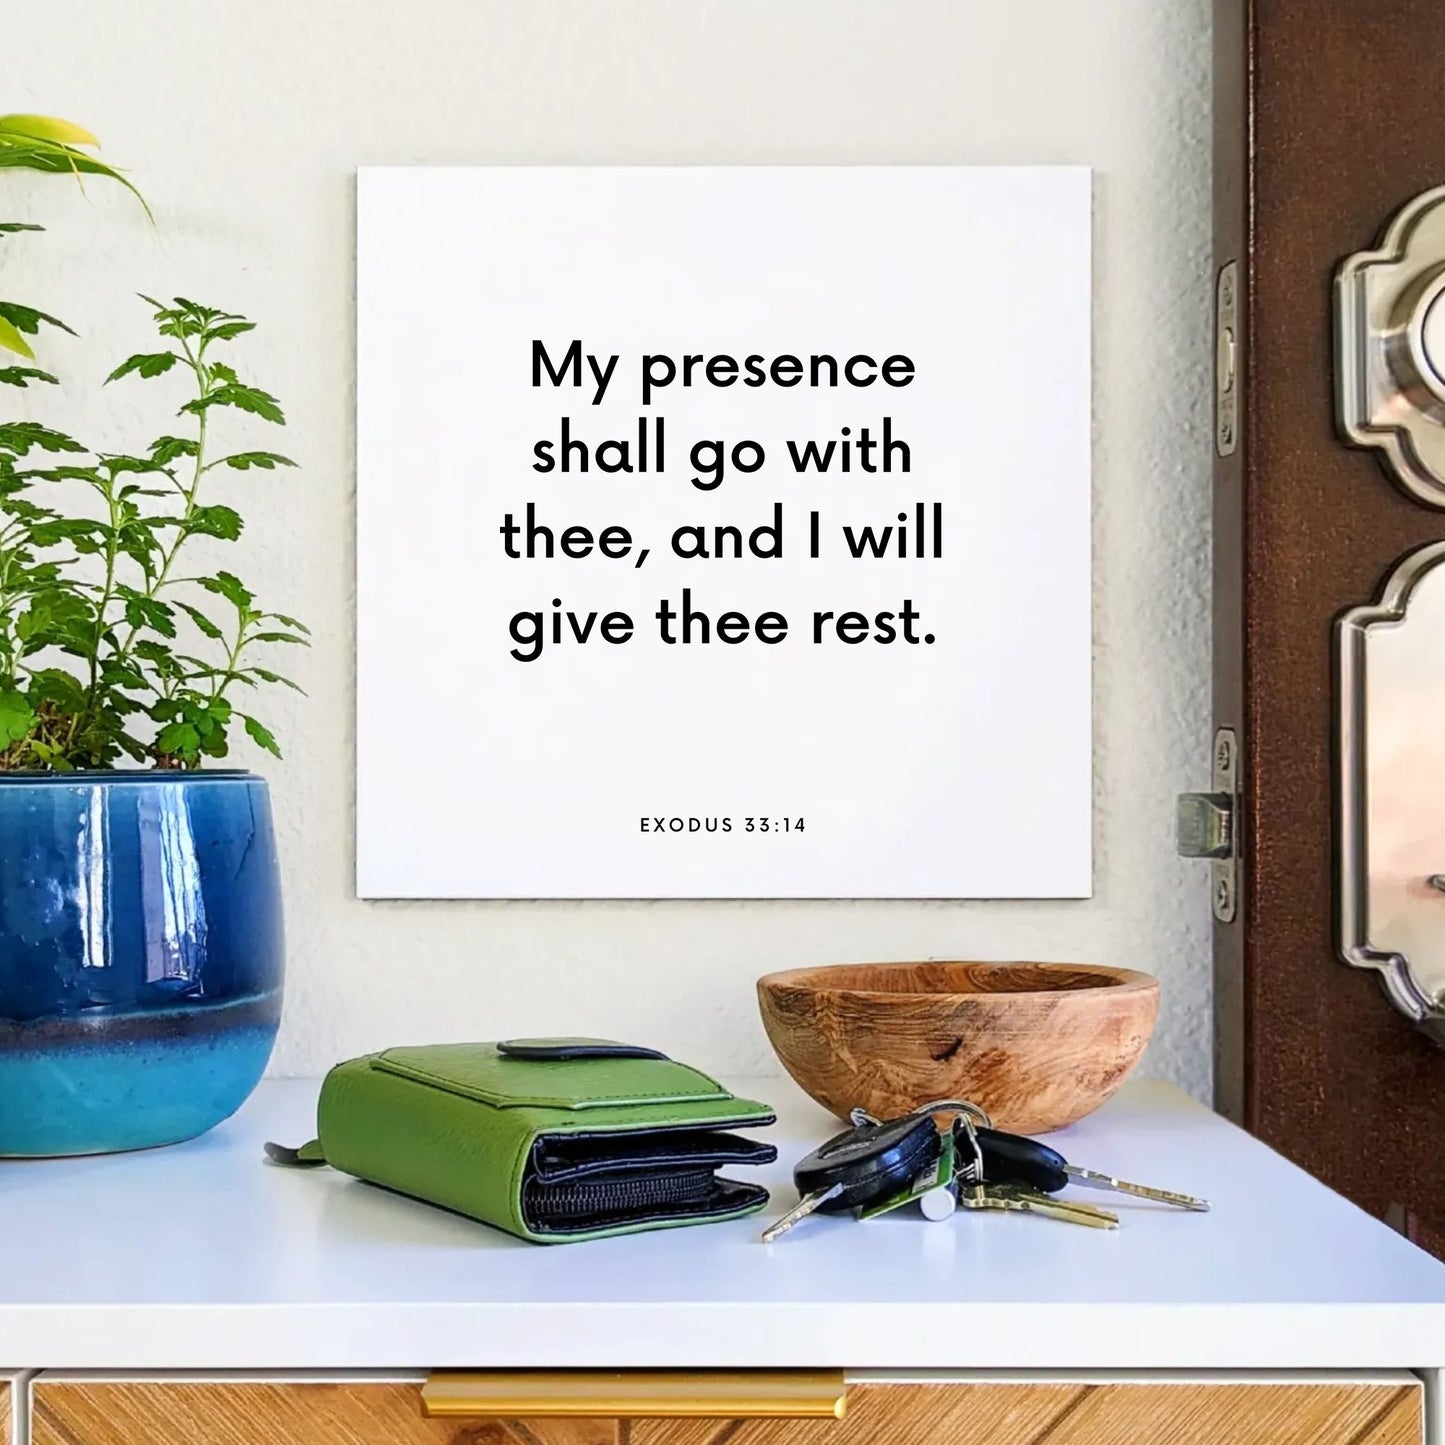 Entryway mouting of the scripture tile for Exodus 33:14 - "My presence shall go with thee, and I will give thee rest"